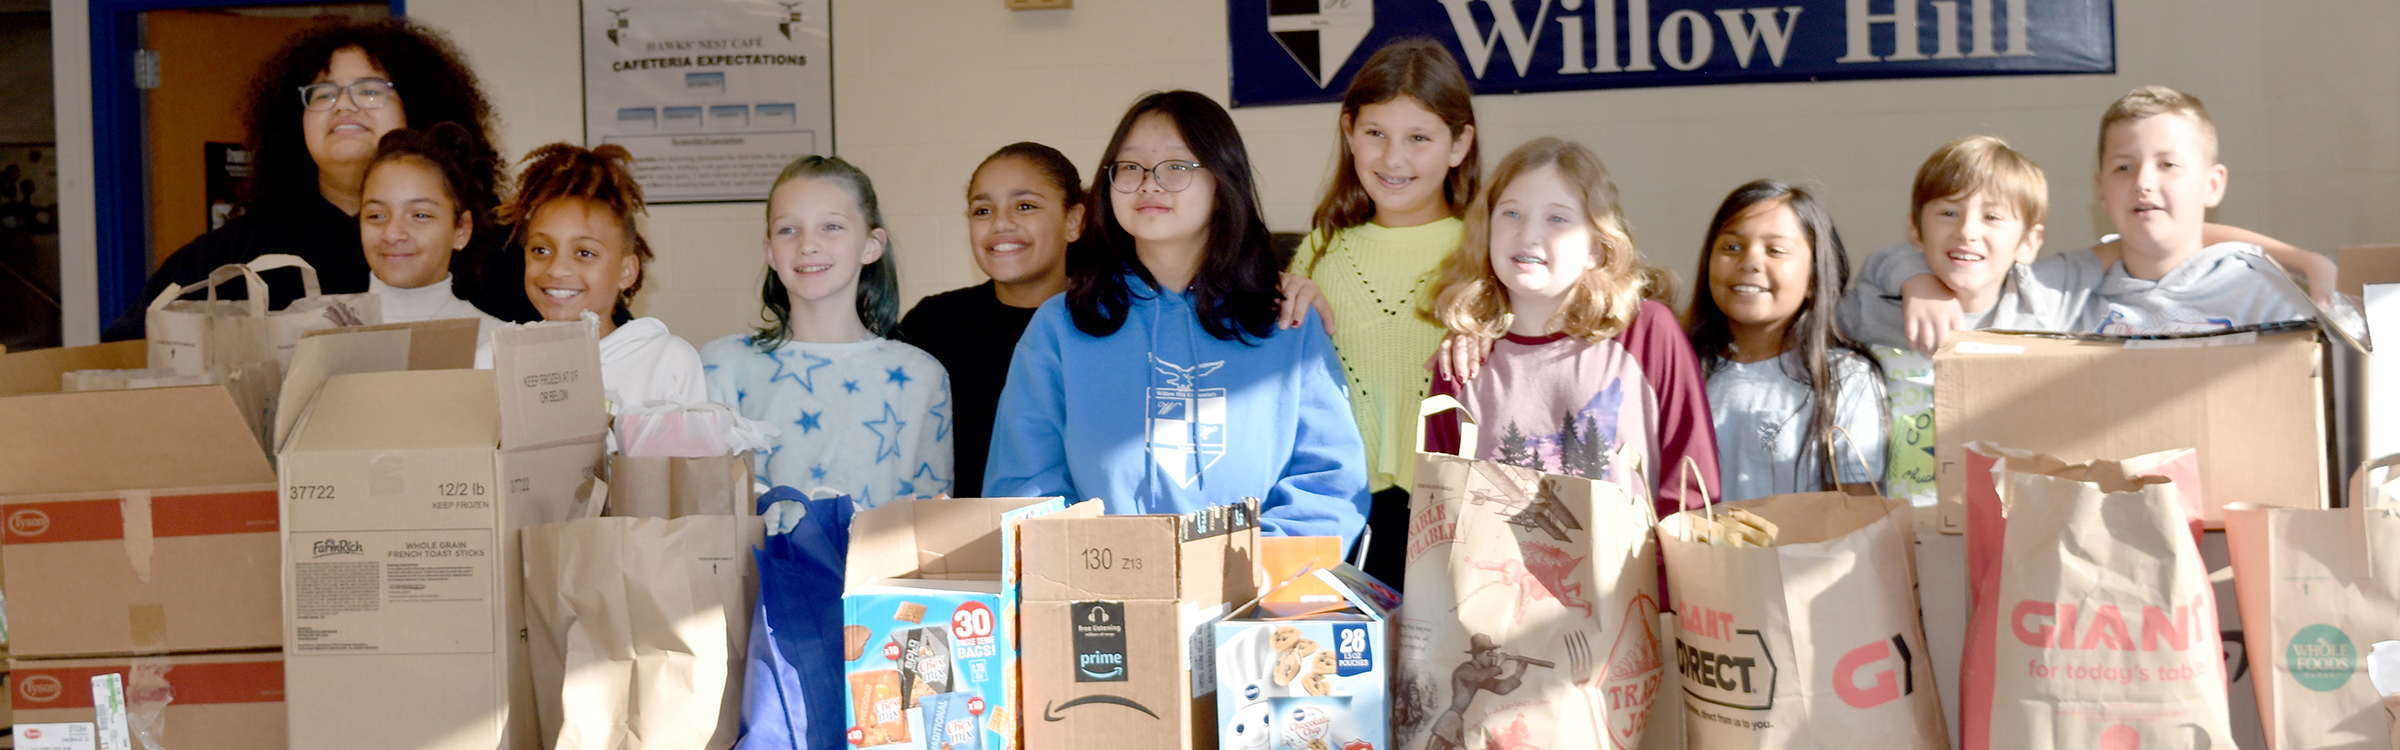 Willow Hill Elementary students gather donations for The Breathing Room organization.